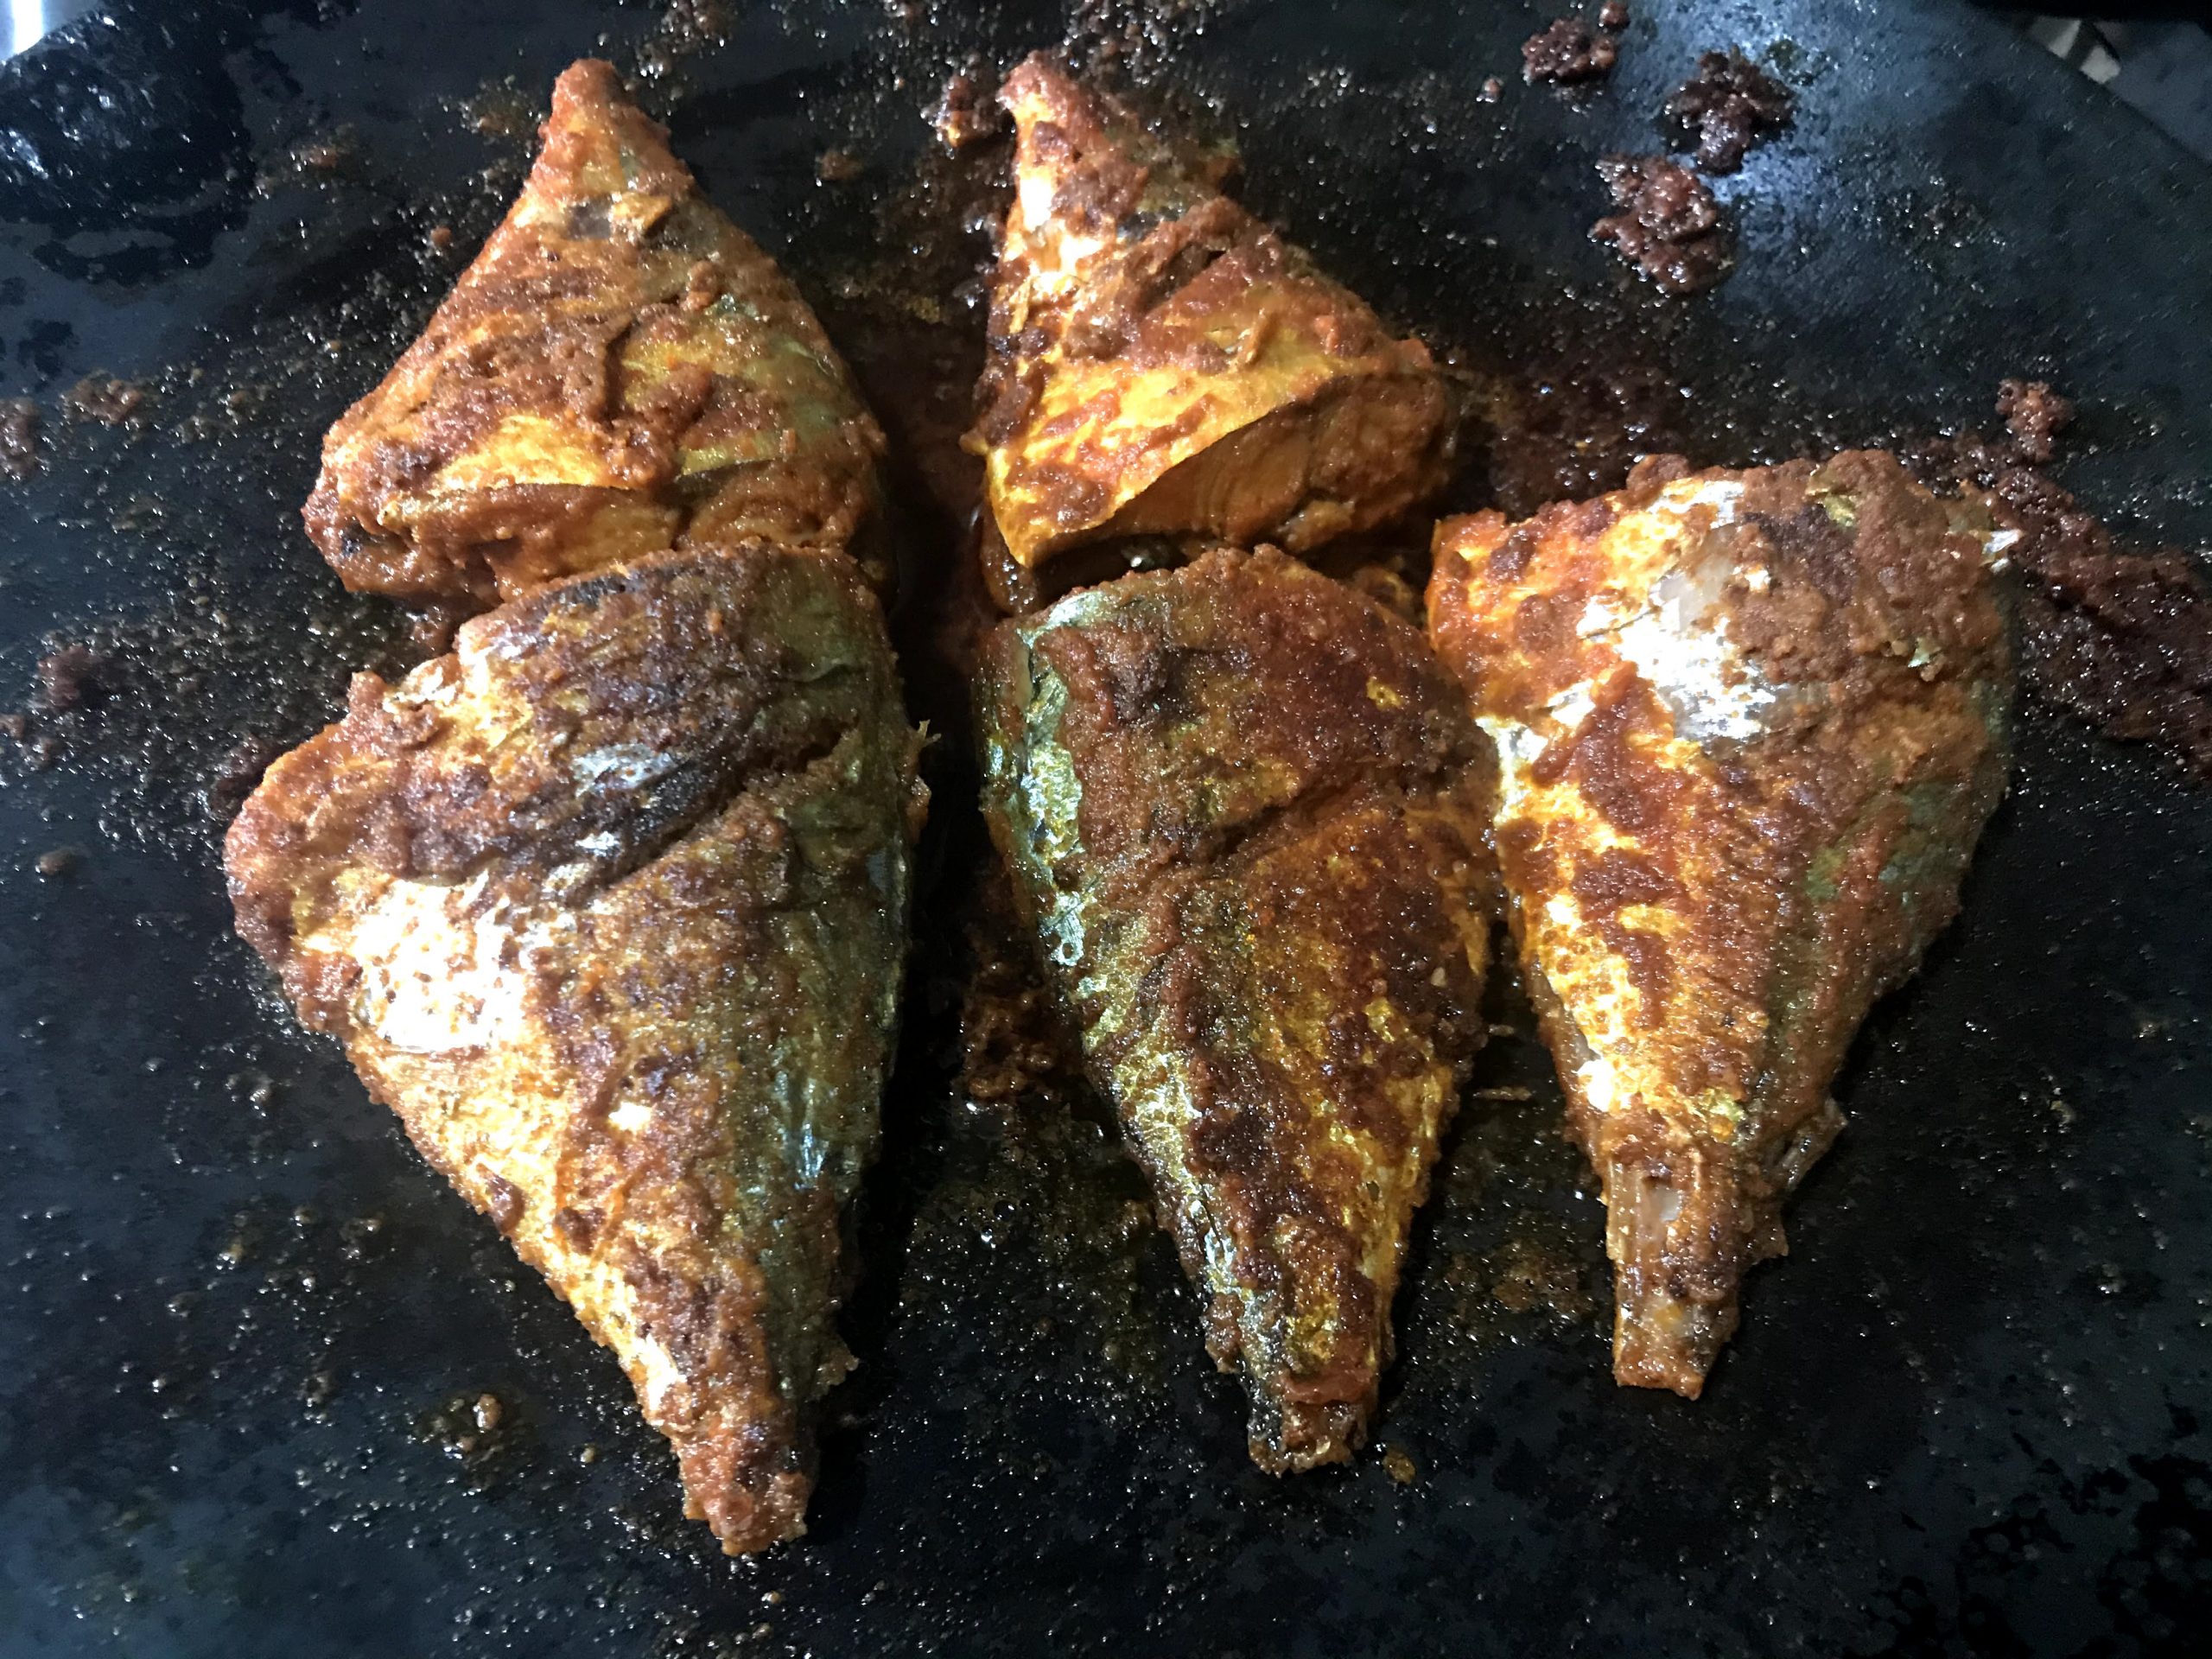 Fried mackerel, grey and silver with orange spices, in black pan